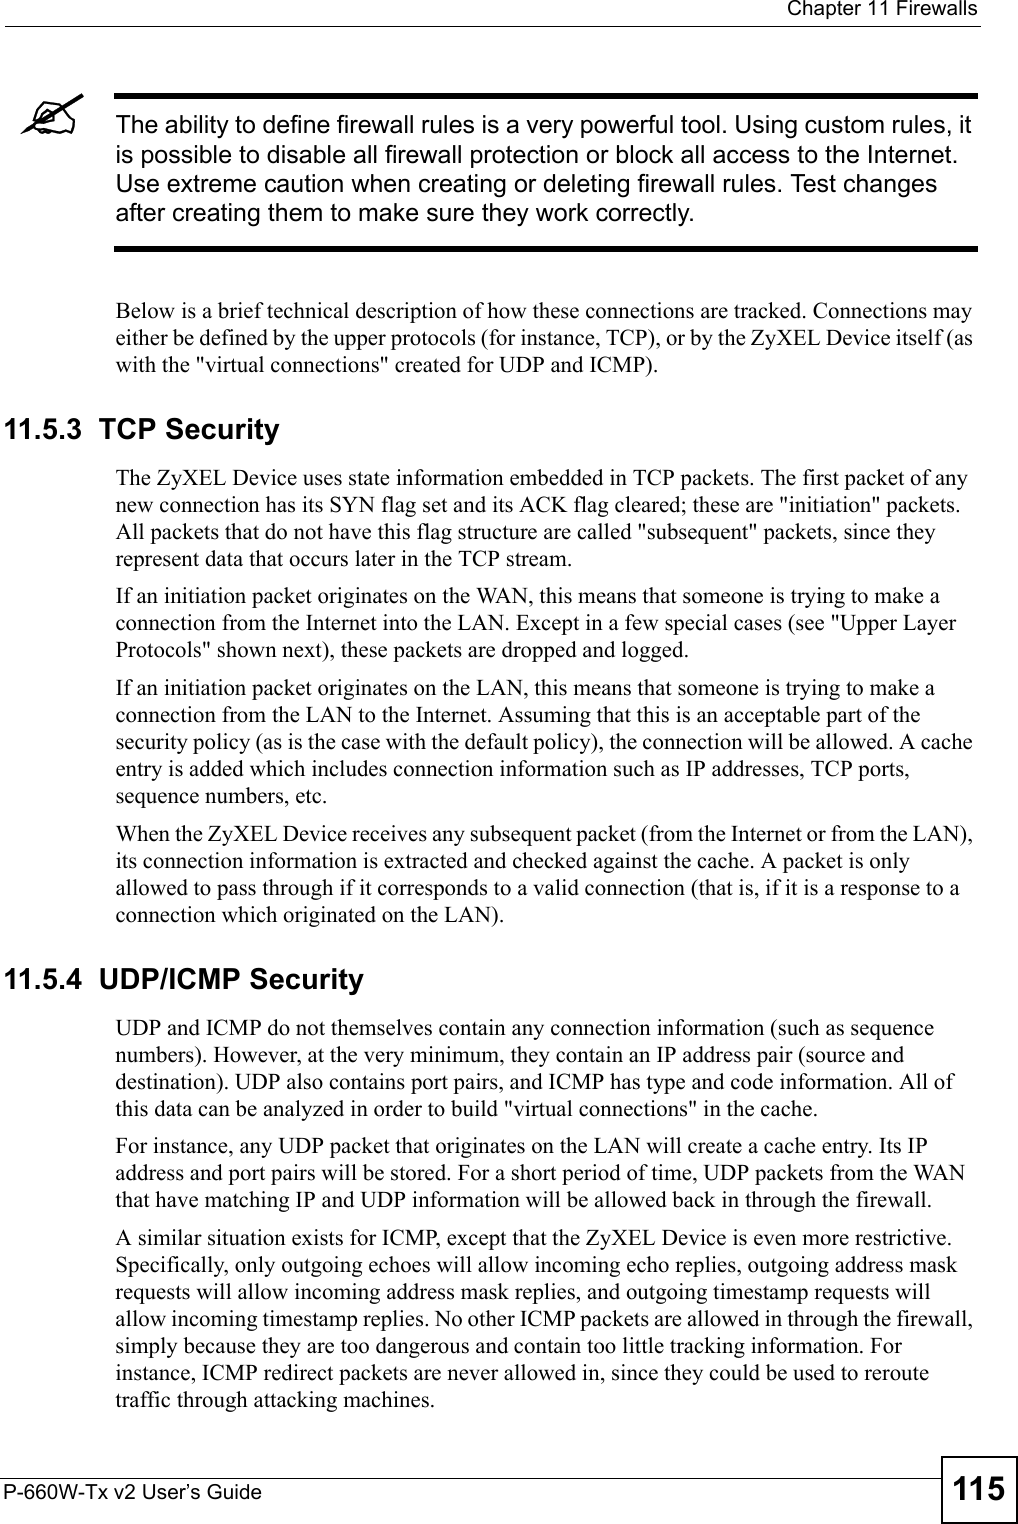  Chapter 11 FirewallsP-660W-Tx v2 User’s Guide 115&quot;The ability to define firewall rules is a very powerful tool. Using custom rules, it is possible to disable all firewall protection or block all access to the Internet. Use extreme caution when creating or deleting firewall rules. Test changes after creating them to make sure they work correctly.Below is a brief technical description of how these connections are tracked. Connections may either be defined by the upper protocols (for instance, TCP), or by the ZyXEL Device itself (as with the &quot;virtual connections&quot; created for UDP and ICMP). 11.5.3  TCP SecurityThe ZyXEL Device uses state information embedded in TCP packets. The first packet of any new connection has its SYN flag set and its ACK flag cleared; these are &quot;initiation&quot; packets. All packets that do not have this flag structure are called &quot;subsequent&quot; packets, since they represent data that occurs later in the TCP stream. If an initiation packet originates on the WAN, this means that someone is trying to make a connection from the Internet into the LAN. Except in a few special cases (see &quot;Upper Layer Protocols&quot; shown next), these packets are dropped and logged.If an initiation packet originates on the LAN, this means that someone is trying to make a connection from the LAN to the Internet. Assuming that this is an acceptable part of the security policy (as is the case with the default policy), the connection will be allowed. A cache entry is added which includes connection information such as IP addresses, TCP ports, sequence numbers, etc.When the ZyXEL Device receives any subsequent packet (from the Internet or from the LAN), its connection information is extracted and checked against the cache. A packet is only allowed to pass through if it corresponds to a valid connection (that is, if it is a response to a connection which originated on the LAN).11.5.4  UDP/ICMP SecurityUDP and ICMP do not themselves contain any connection information (such as sequence numbers). However, at the very minimum, they contain an IP address pair (source and destination). UDP also contains port pairs, and ICMP has type and code information. All of this data can be analyzed in order to build &quot;virtual connections&quot; in the cache. For instance, any UDP packet that originates on the LAN will create a cache entry. Its IP address and port pairs will be stored. For a short period of time, UDP packets from the WAN that have matching IP and UDP information will be allowed back in through the firewall.A similar situation exists for ICMP, except that the ZyXEL Device is even more restrictive. Specifically, only outgoing echoes will allow incoming echo replies, outgoing address mask requests will allow incoming address mask replies, and outgoing timestamp requests will allow incoming timestamp replies. No other ICMP packets are allowed in through the firewall, simply because they are too dangerous and contain too little tracking information. For instance, ICMP redirect packets are never allowed in, since they could be used to reroute traffic through attacking machines. 